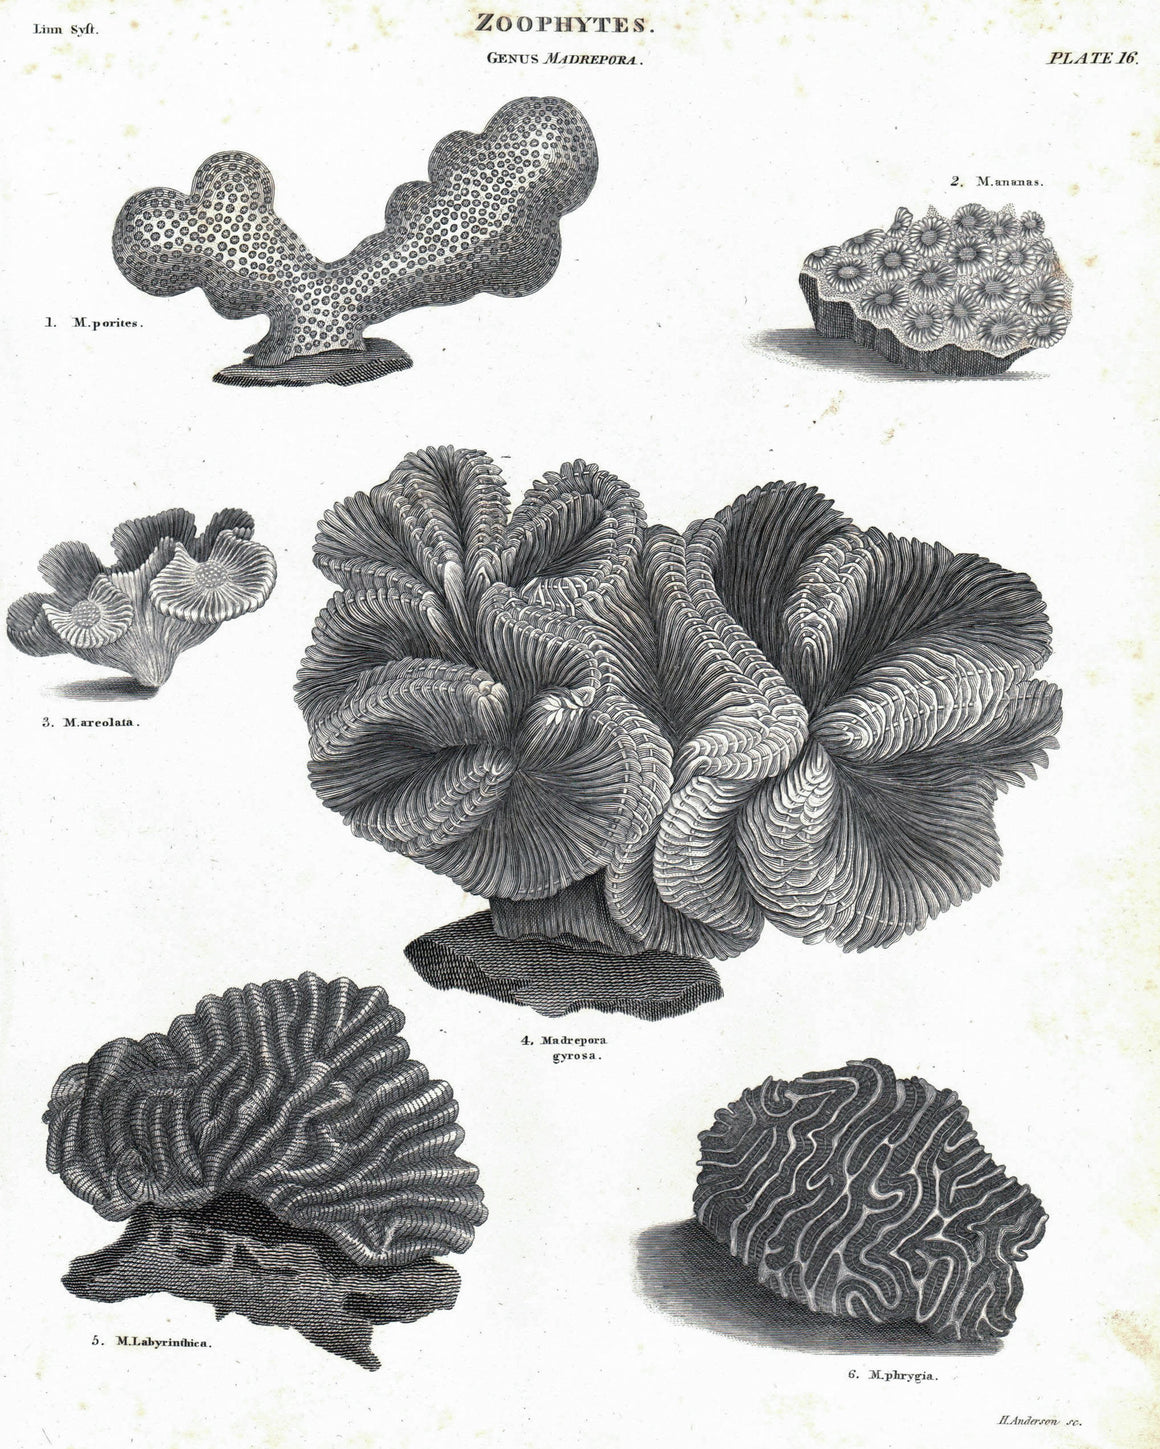 1834 Zoophytes Plate 16